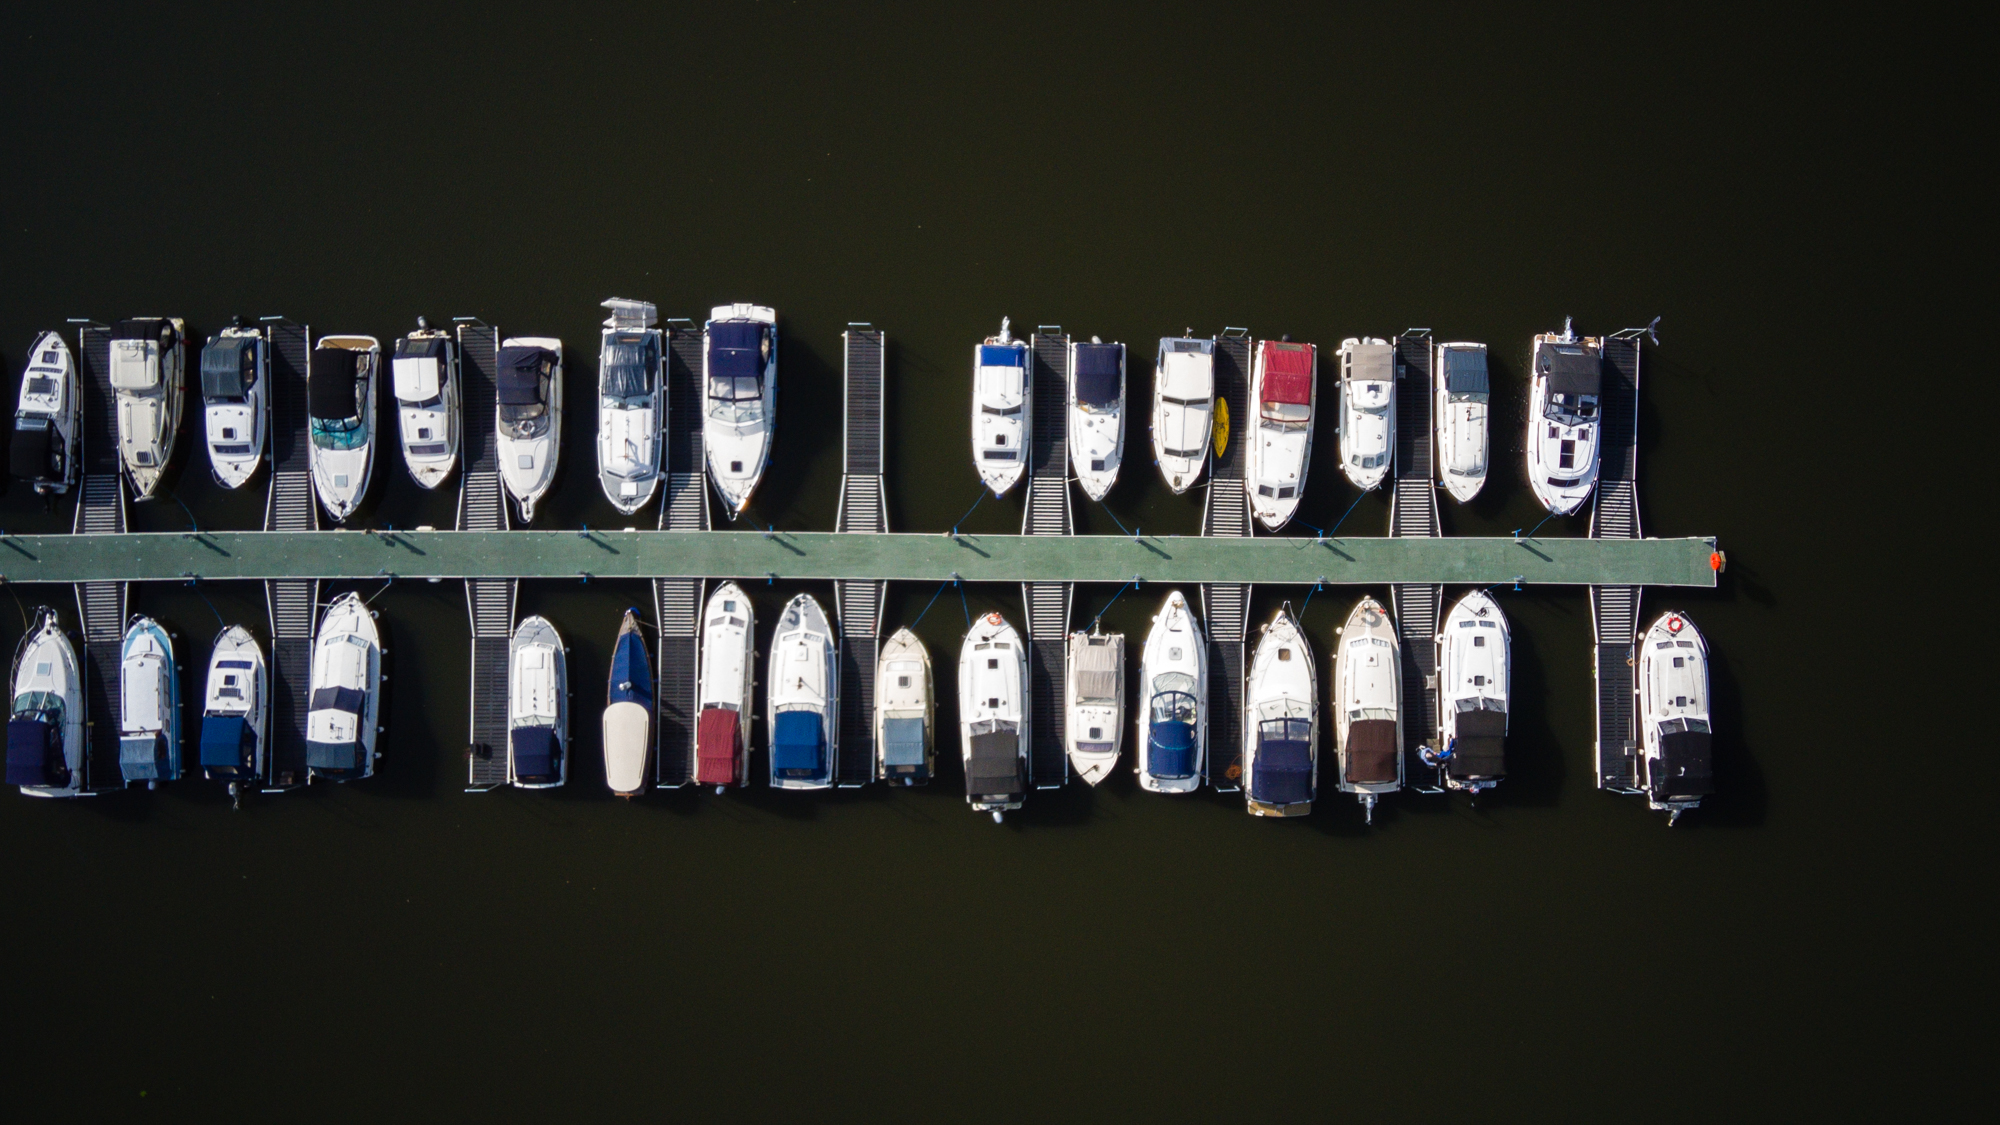 Photo of boats from above taken with the Potensic Atom drone